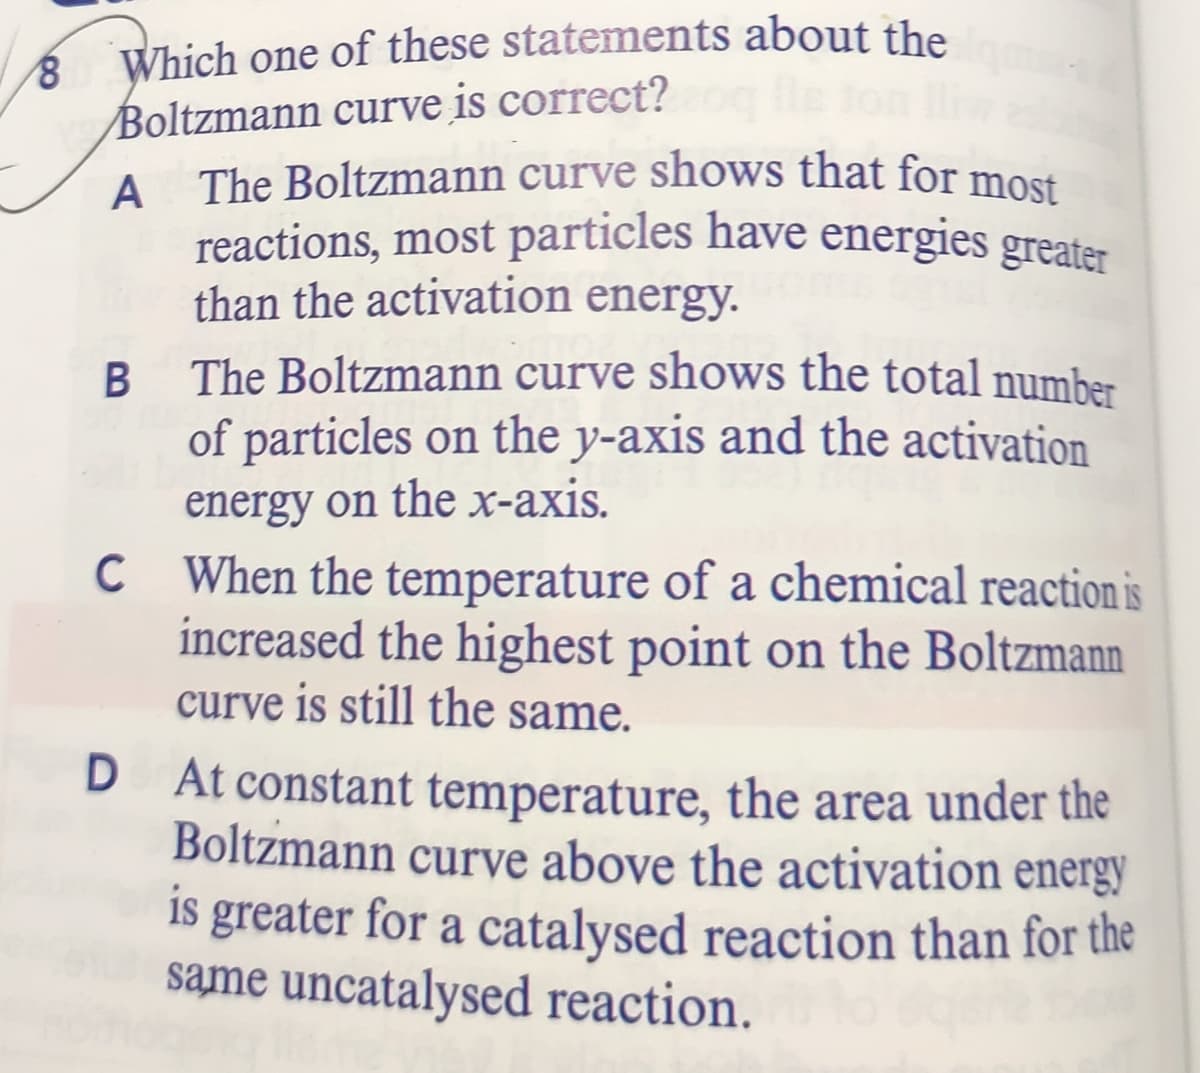 reactions, most particles have energies greater
Which one of these statements about the
Boltzmann curve is correct?
A
A The Boltzmann curve shows that for most
than the activation energy.
The Boltzmann curve shows the total number
of particles on the y-axis and the activation
energy on the x-axis.
C When the temperature of a chemical reaction is
increased the highest point on the Boltzmann
curve is still the same.
D At constant temperature, the area under the
Boltzmann curve above the activation energy
is greater for a catalysed reaction than for the
same uncatalysed reaction.
